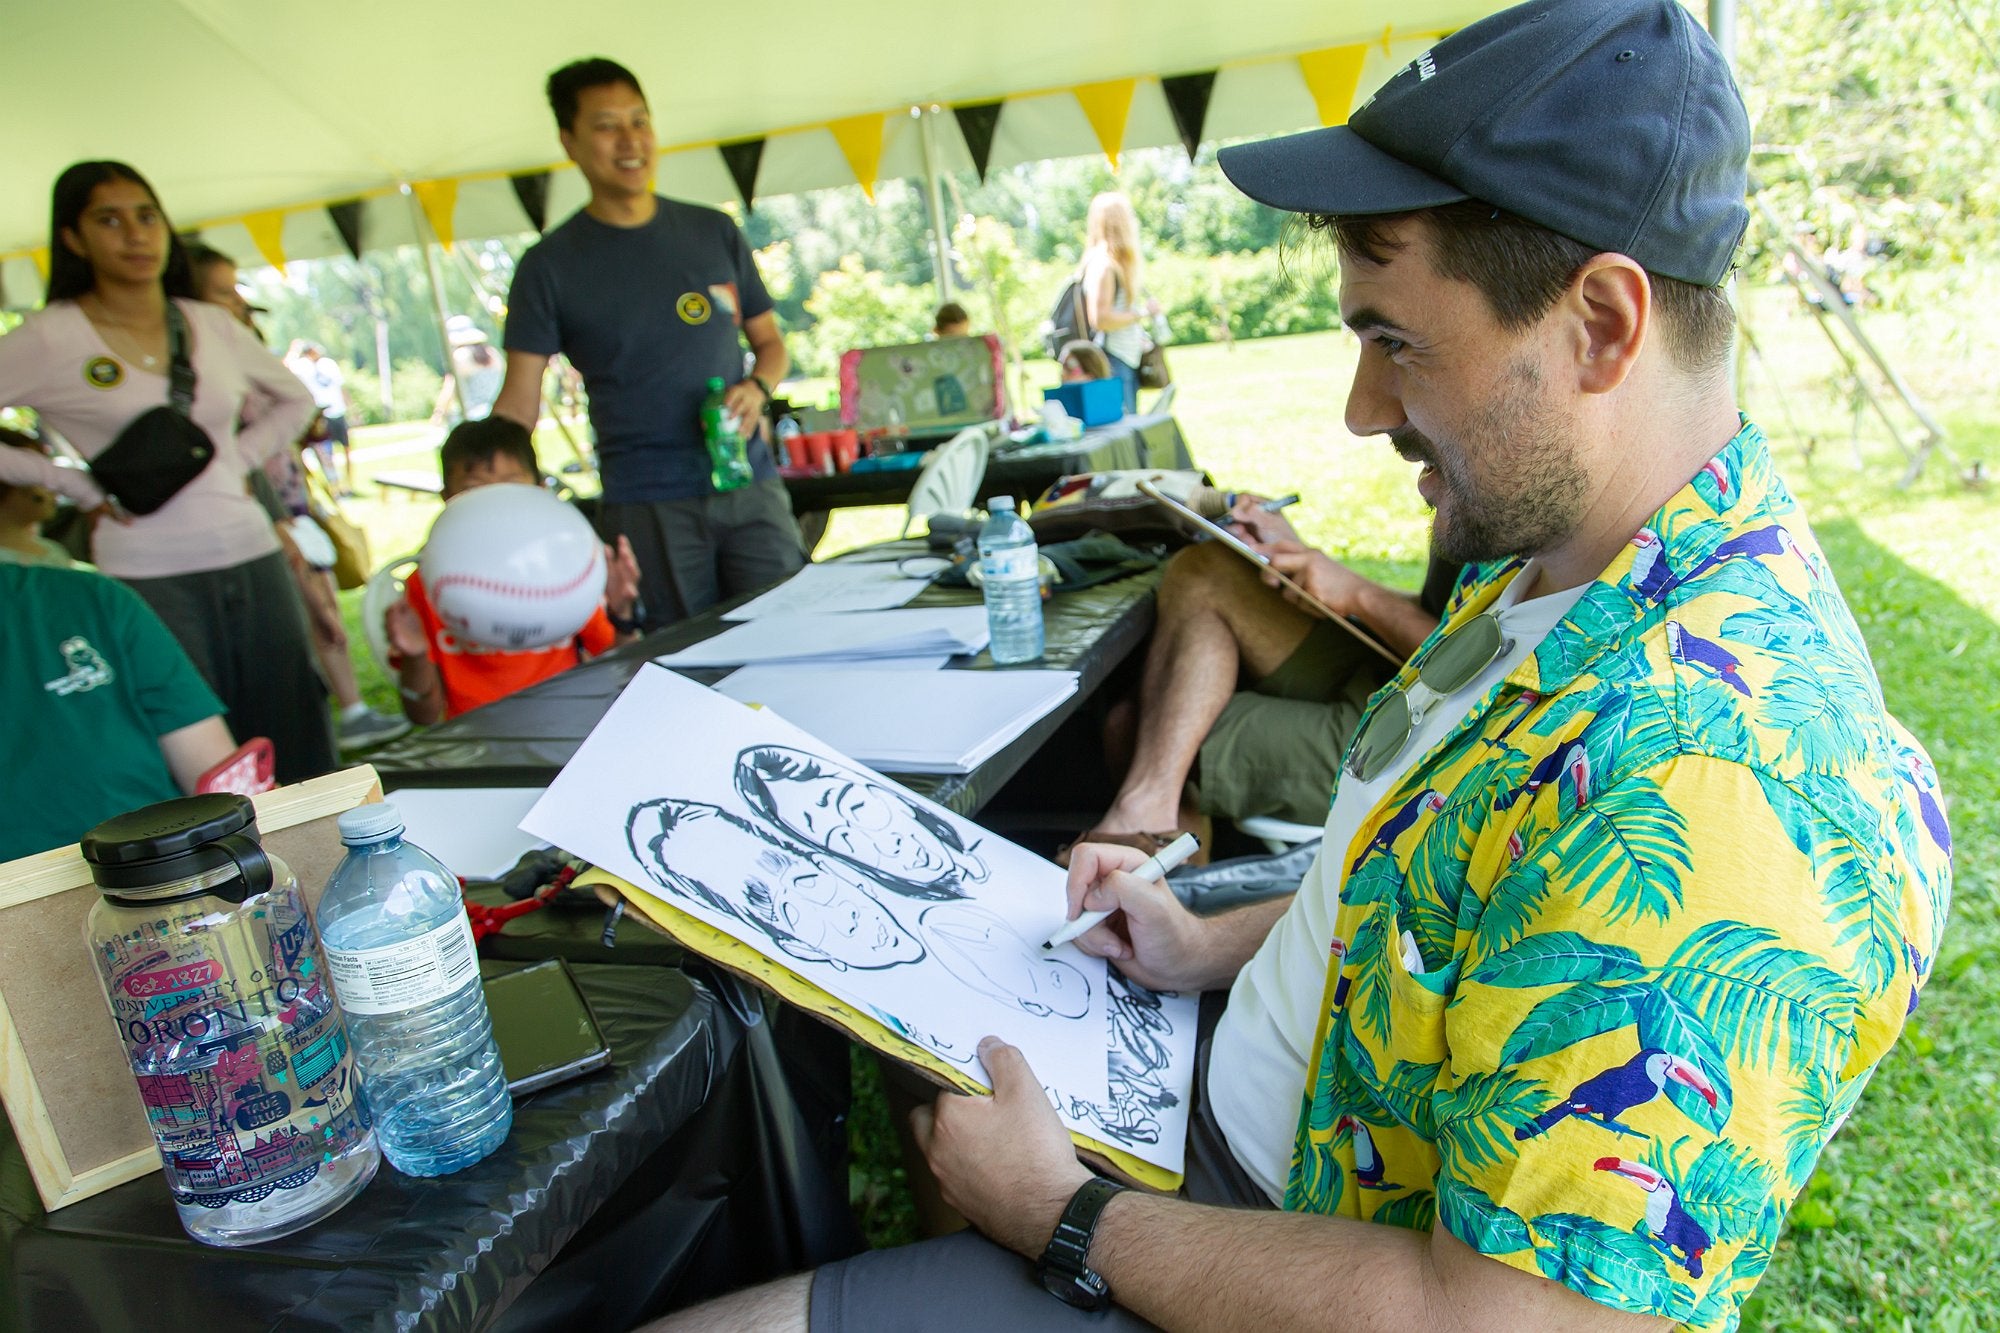 A caricature artist drawing an image